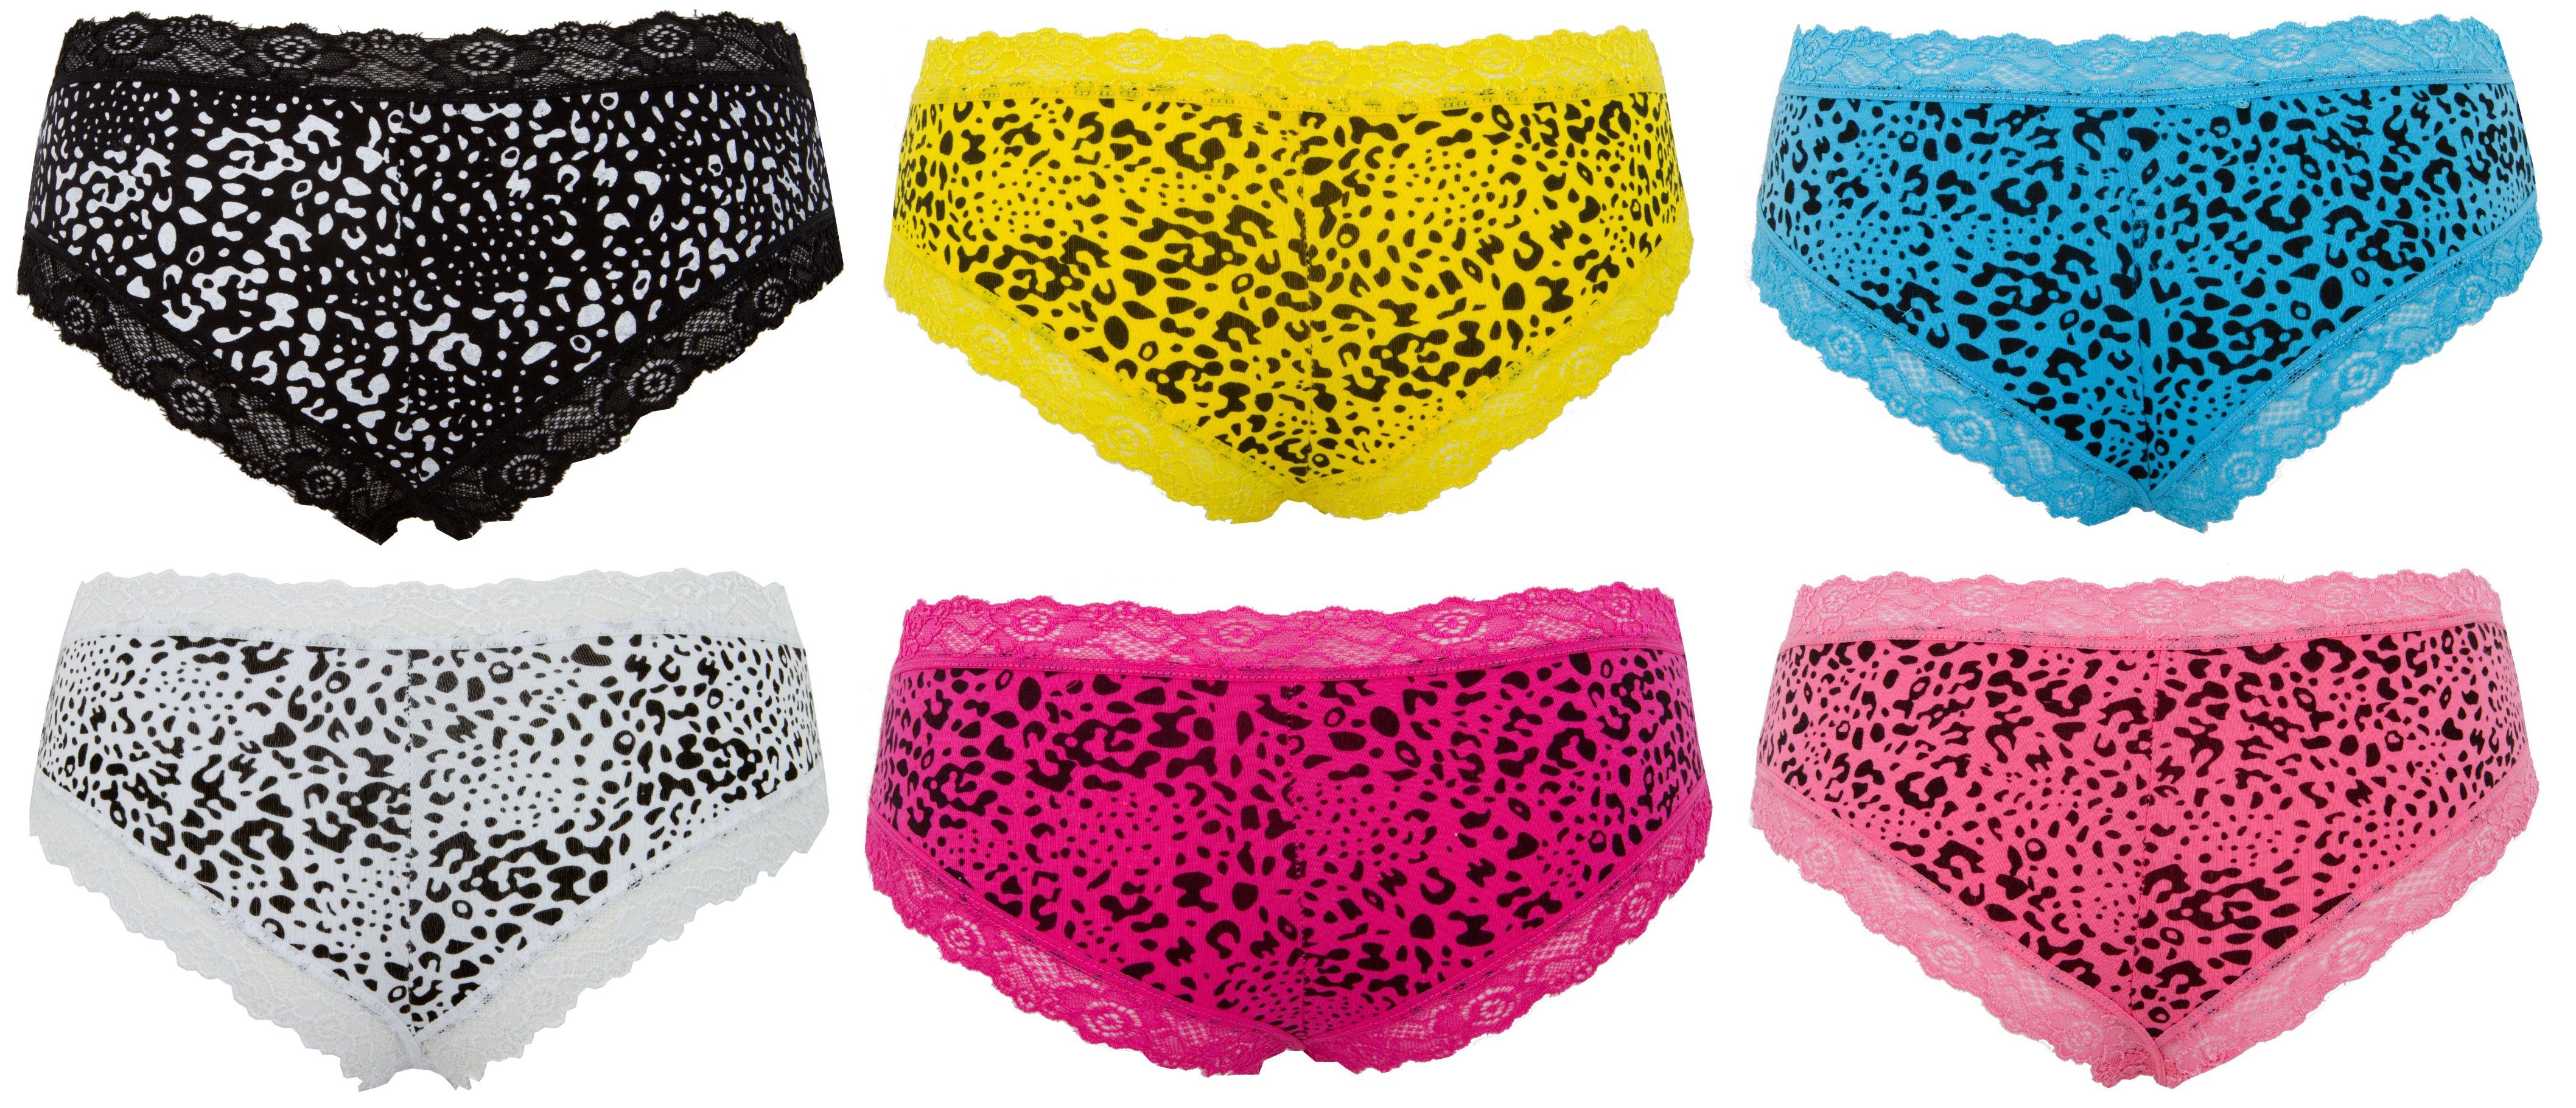 mit Knickers 86797 6er Spitze Teen Teen Pack Uni Knickers French AvaMia French Hipster 6er-Pack) Spitze Pack 86797 mit Damen 6er Panty Damen Hotpants (Spar-Set, Pantys Hipster Uni Hotpants Pantys